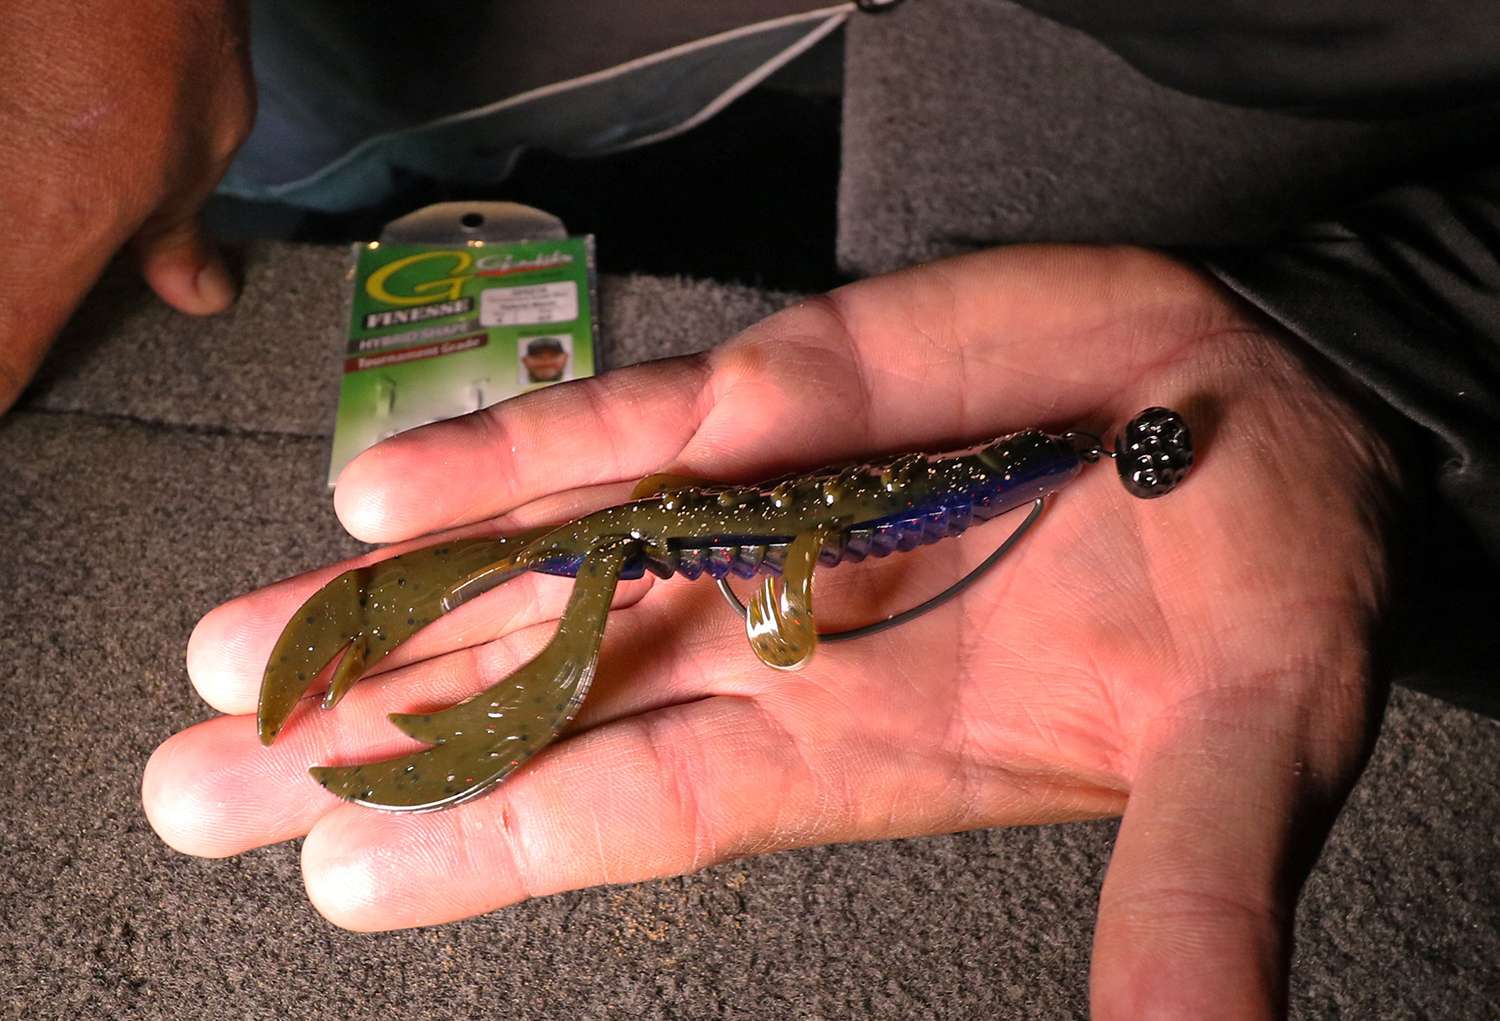 Winner Harvey Horne crafted a winning rig using three lure components. A 3/8-ounce All Terrain Tackle Swing Head Rock Jig, with a 6/0 Gamakatsu G Finesse Hybrid Worm Hook composed the jig. A 5-inch Big Bite Baits Fighting Frog completed the rig.